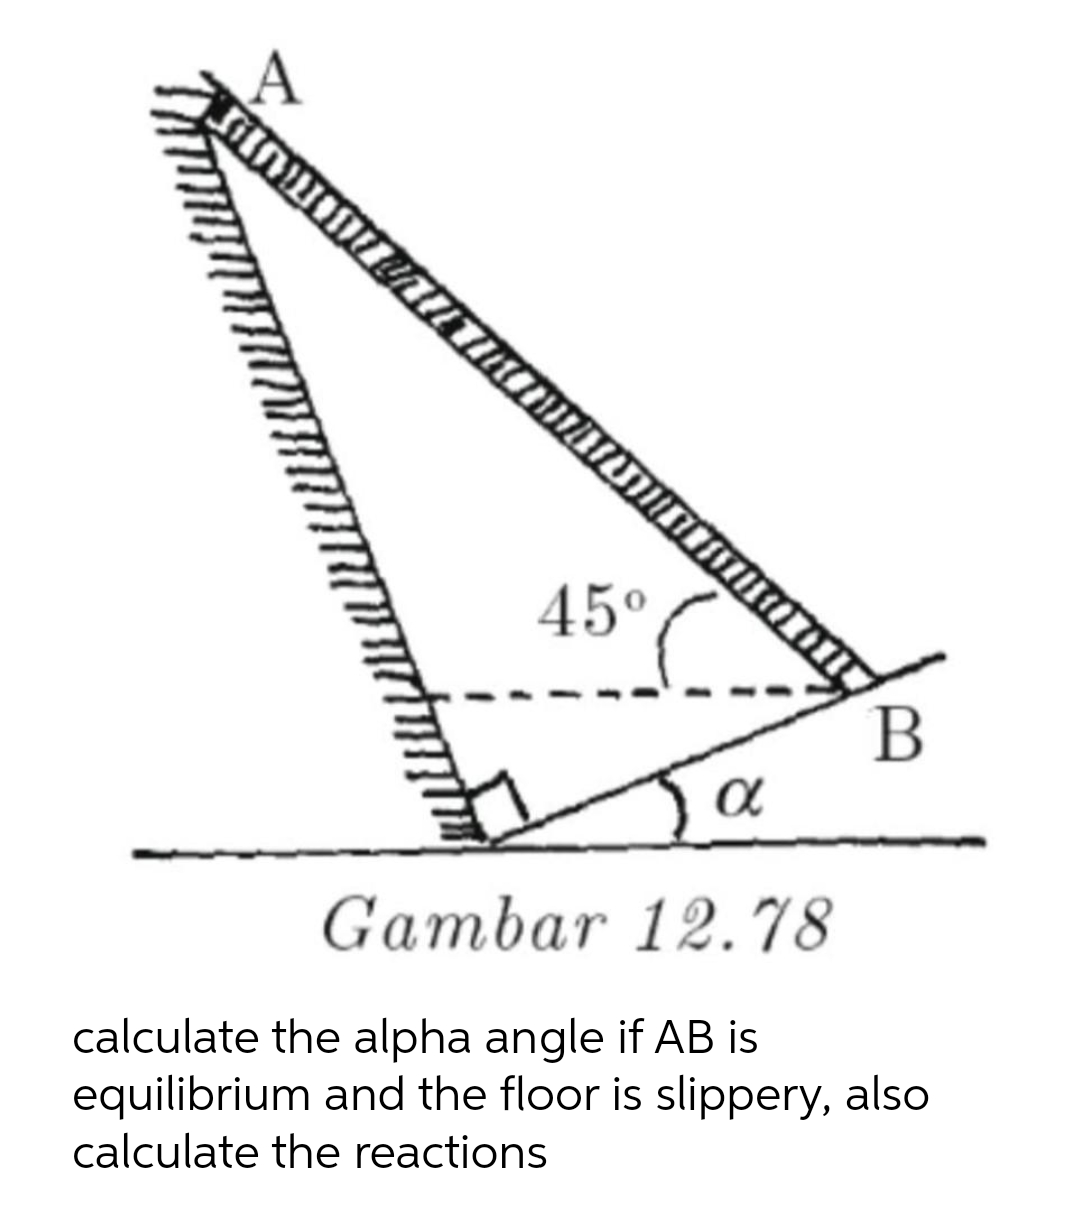 Látorom
45⁰
α
Gambar 12.78
B
calculate the alpha angle if AB is
equilibrium and the floor is slippery, also
calculate the reactions